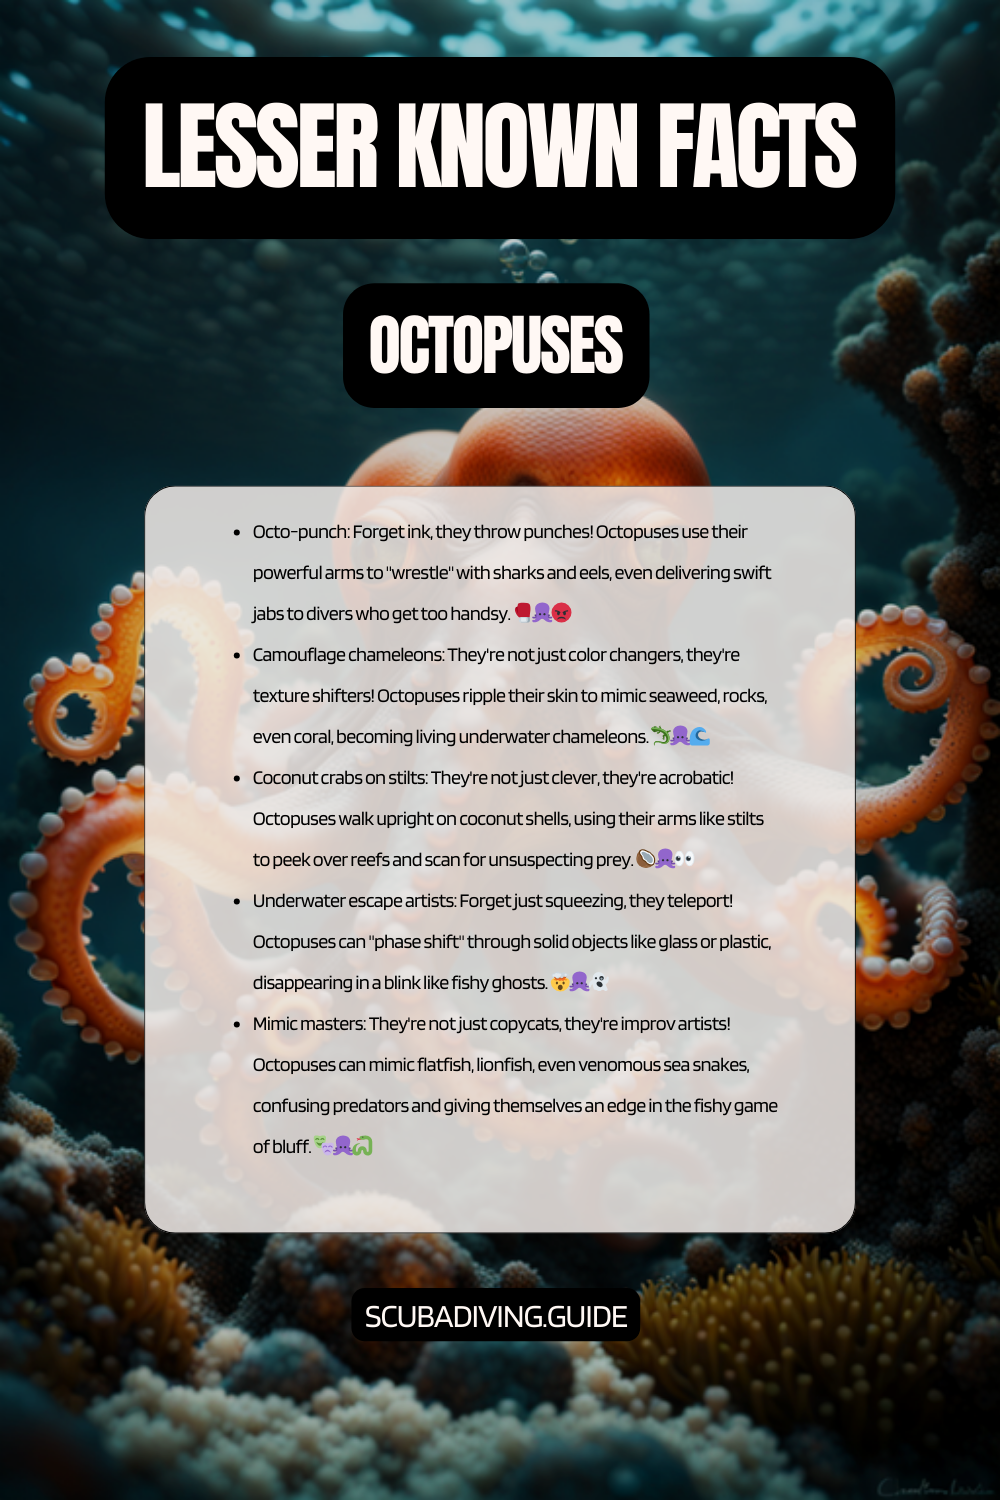 lesser known facts Octopuses